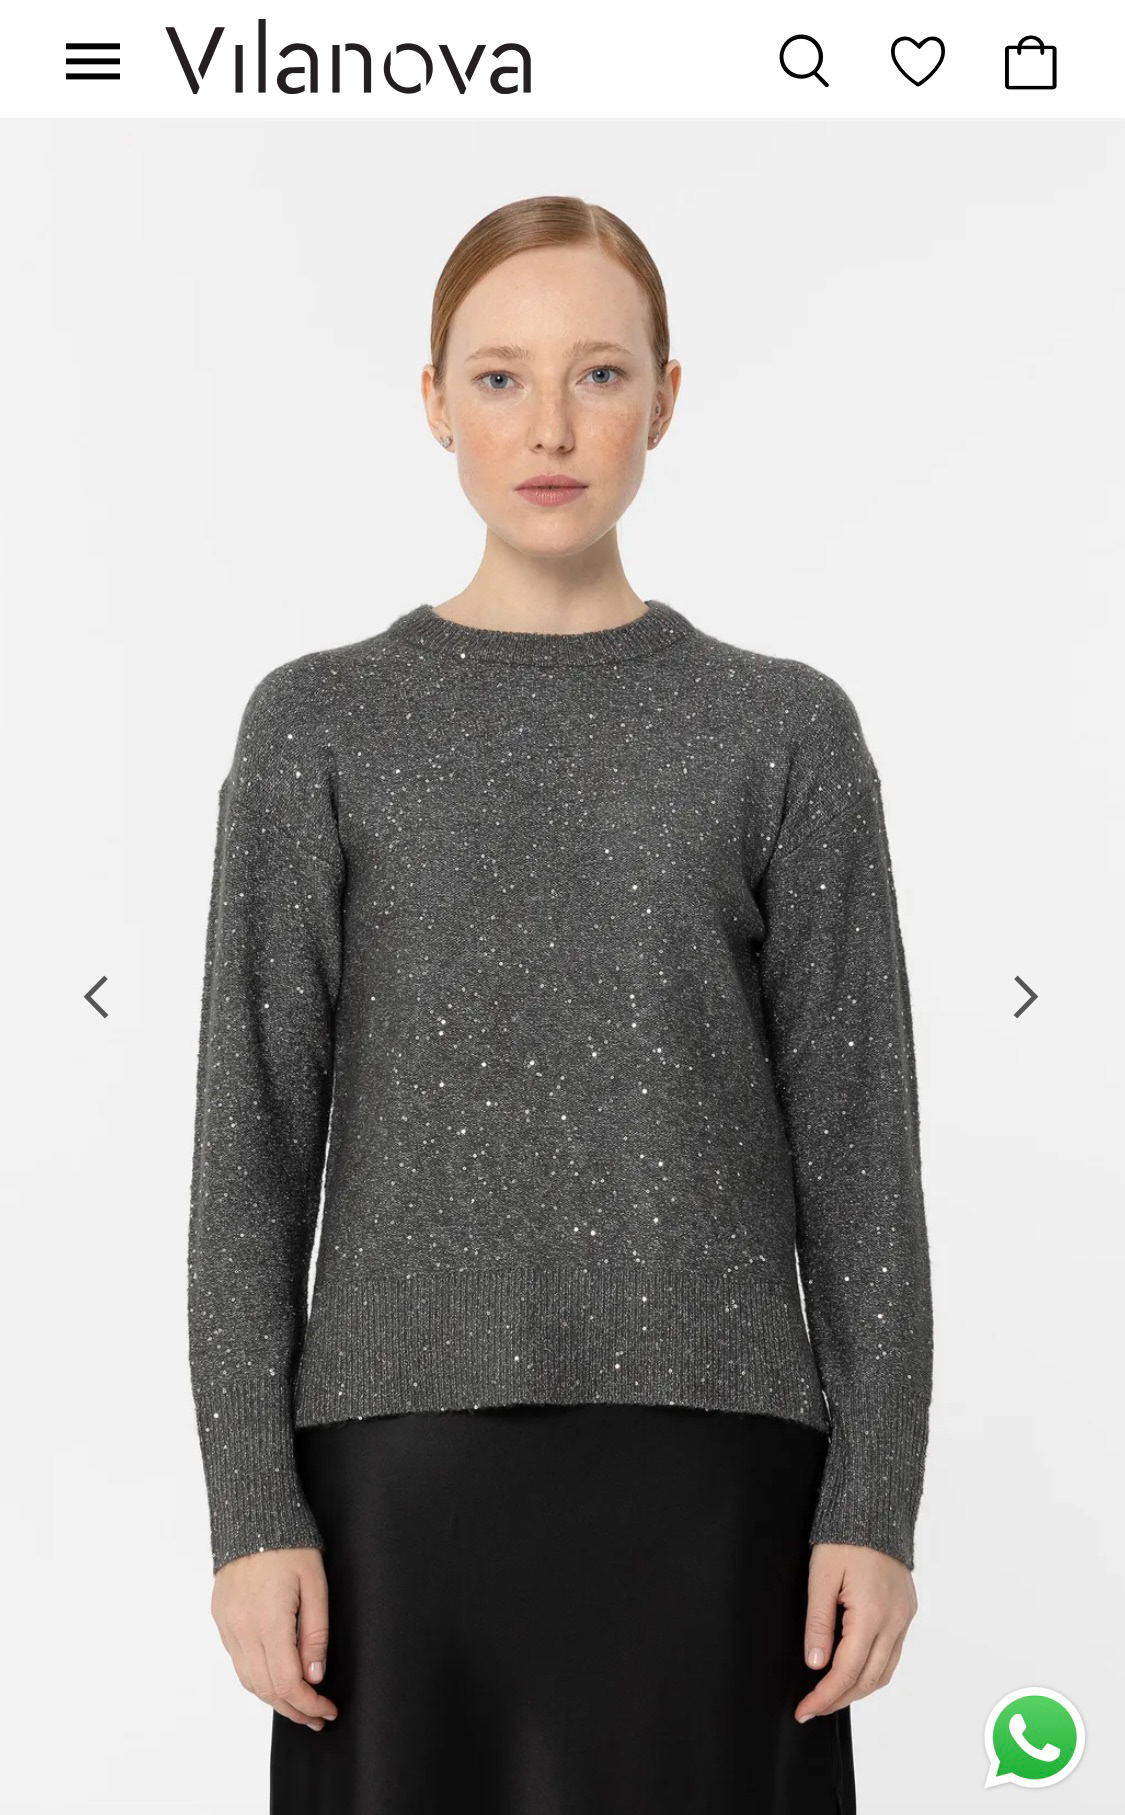 sequins Sweaters knitwear fashiondesign